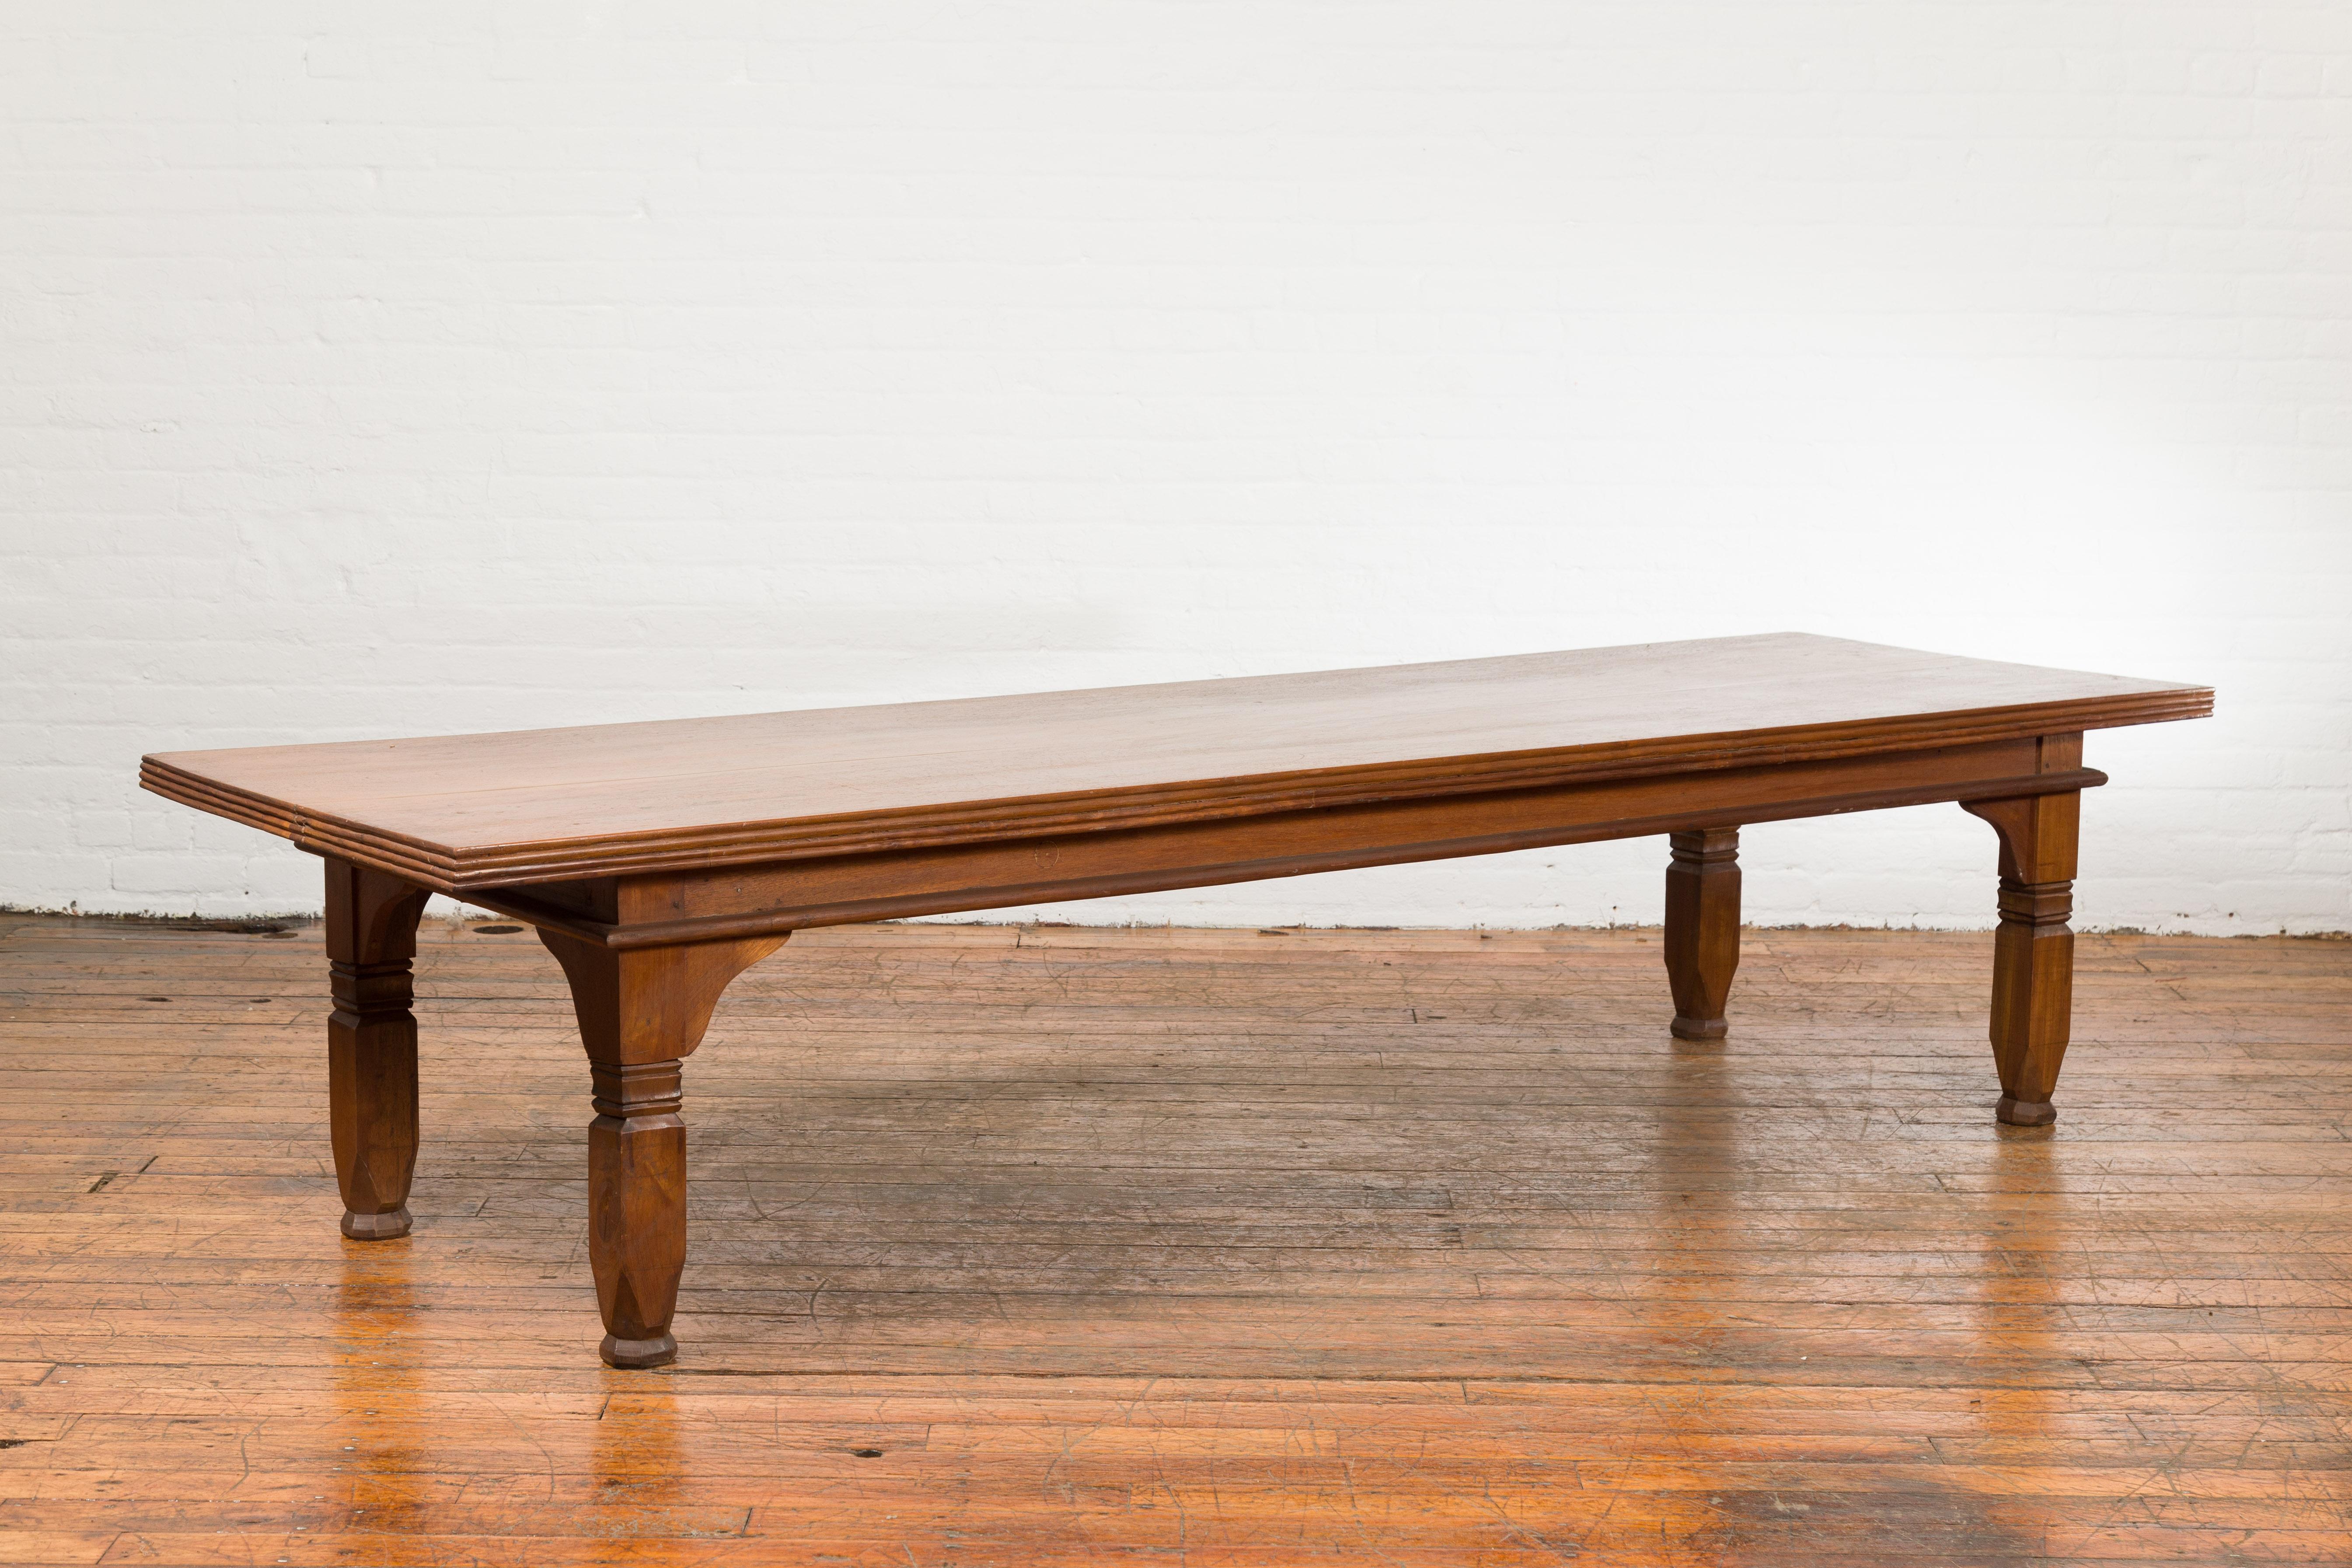 Oversized 19th Century Indonesian Coffee Table with Reeded Edge and Carved Legs For Sale 4